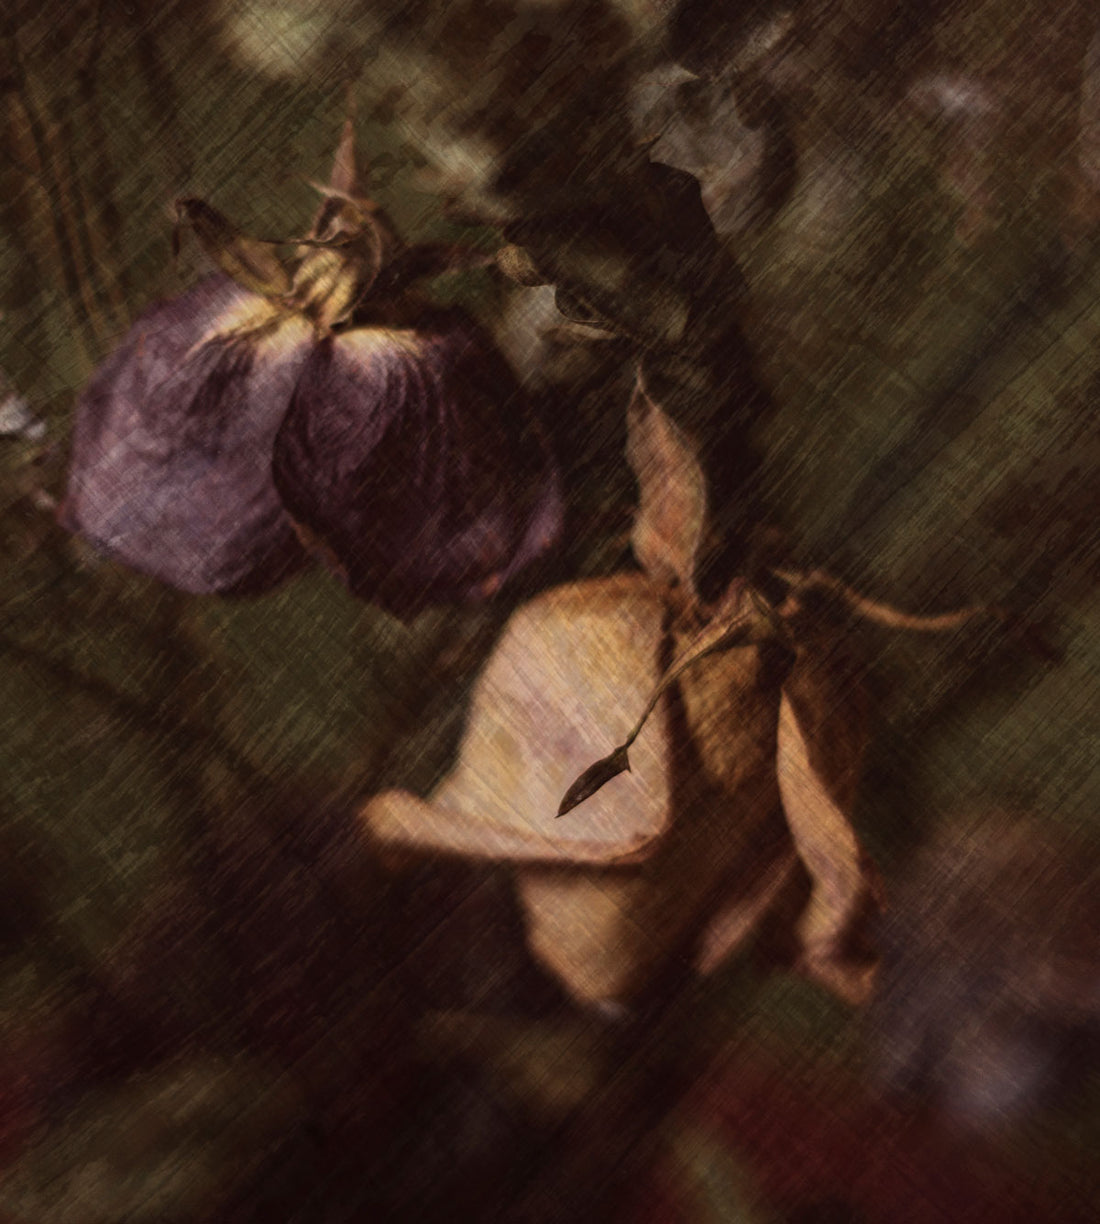 Example of picture of dead flowers with texture added in Photoshop.